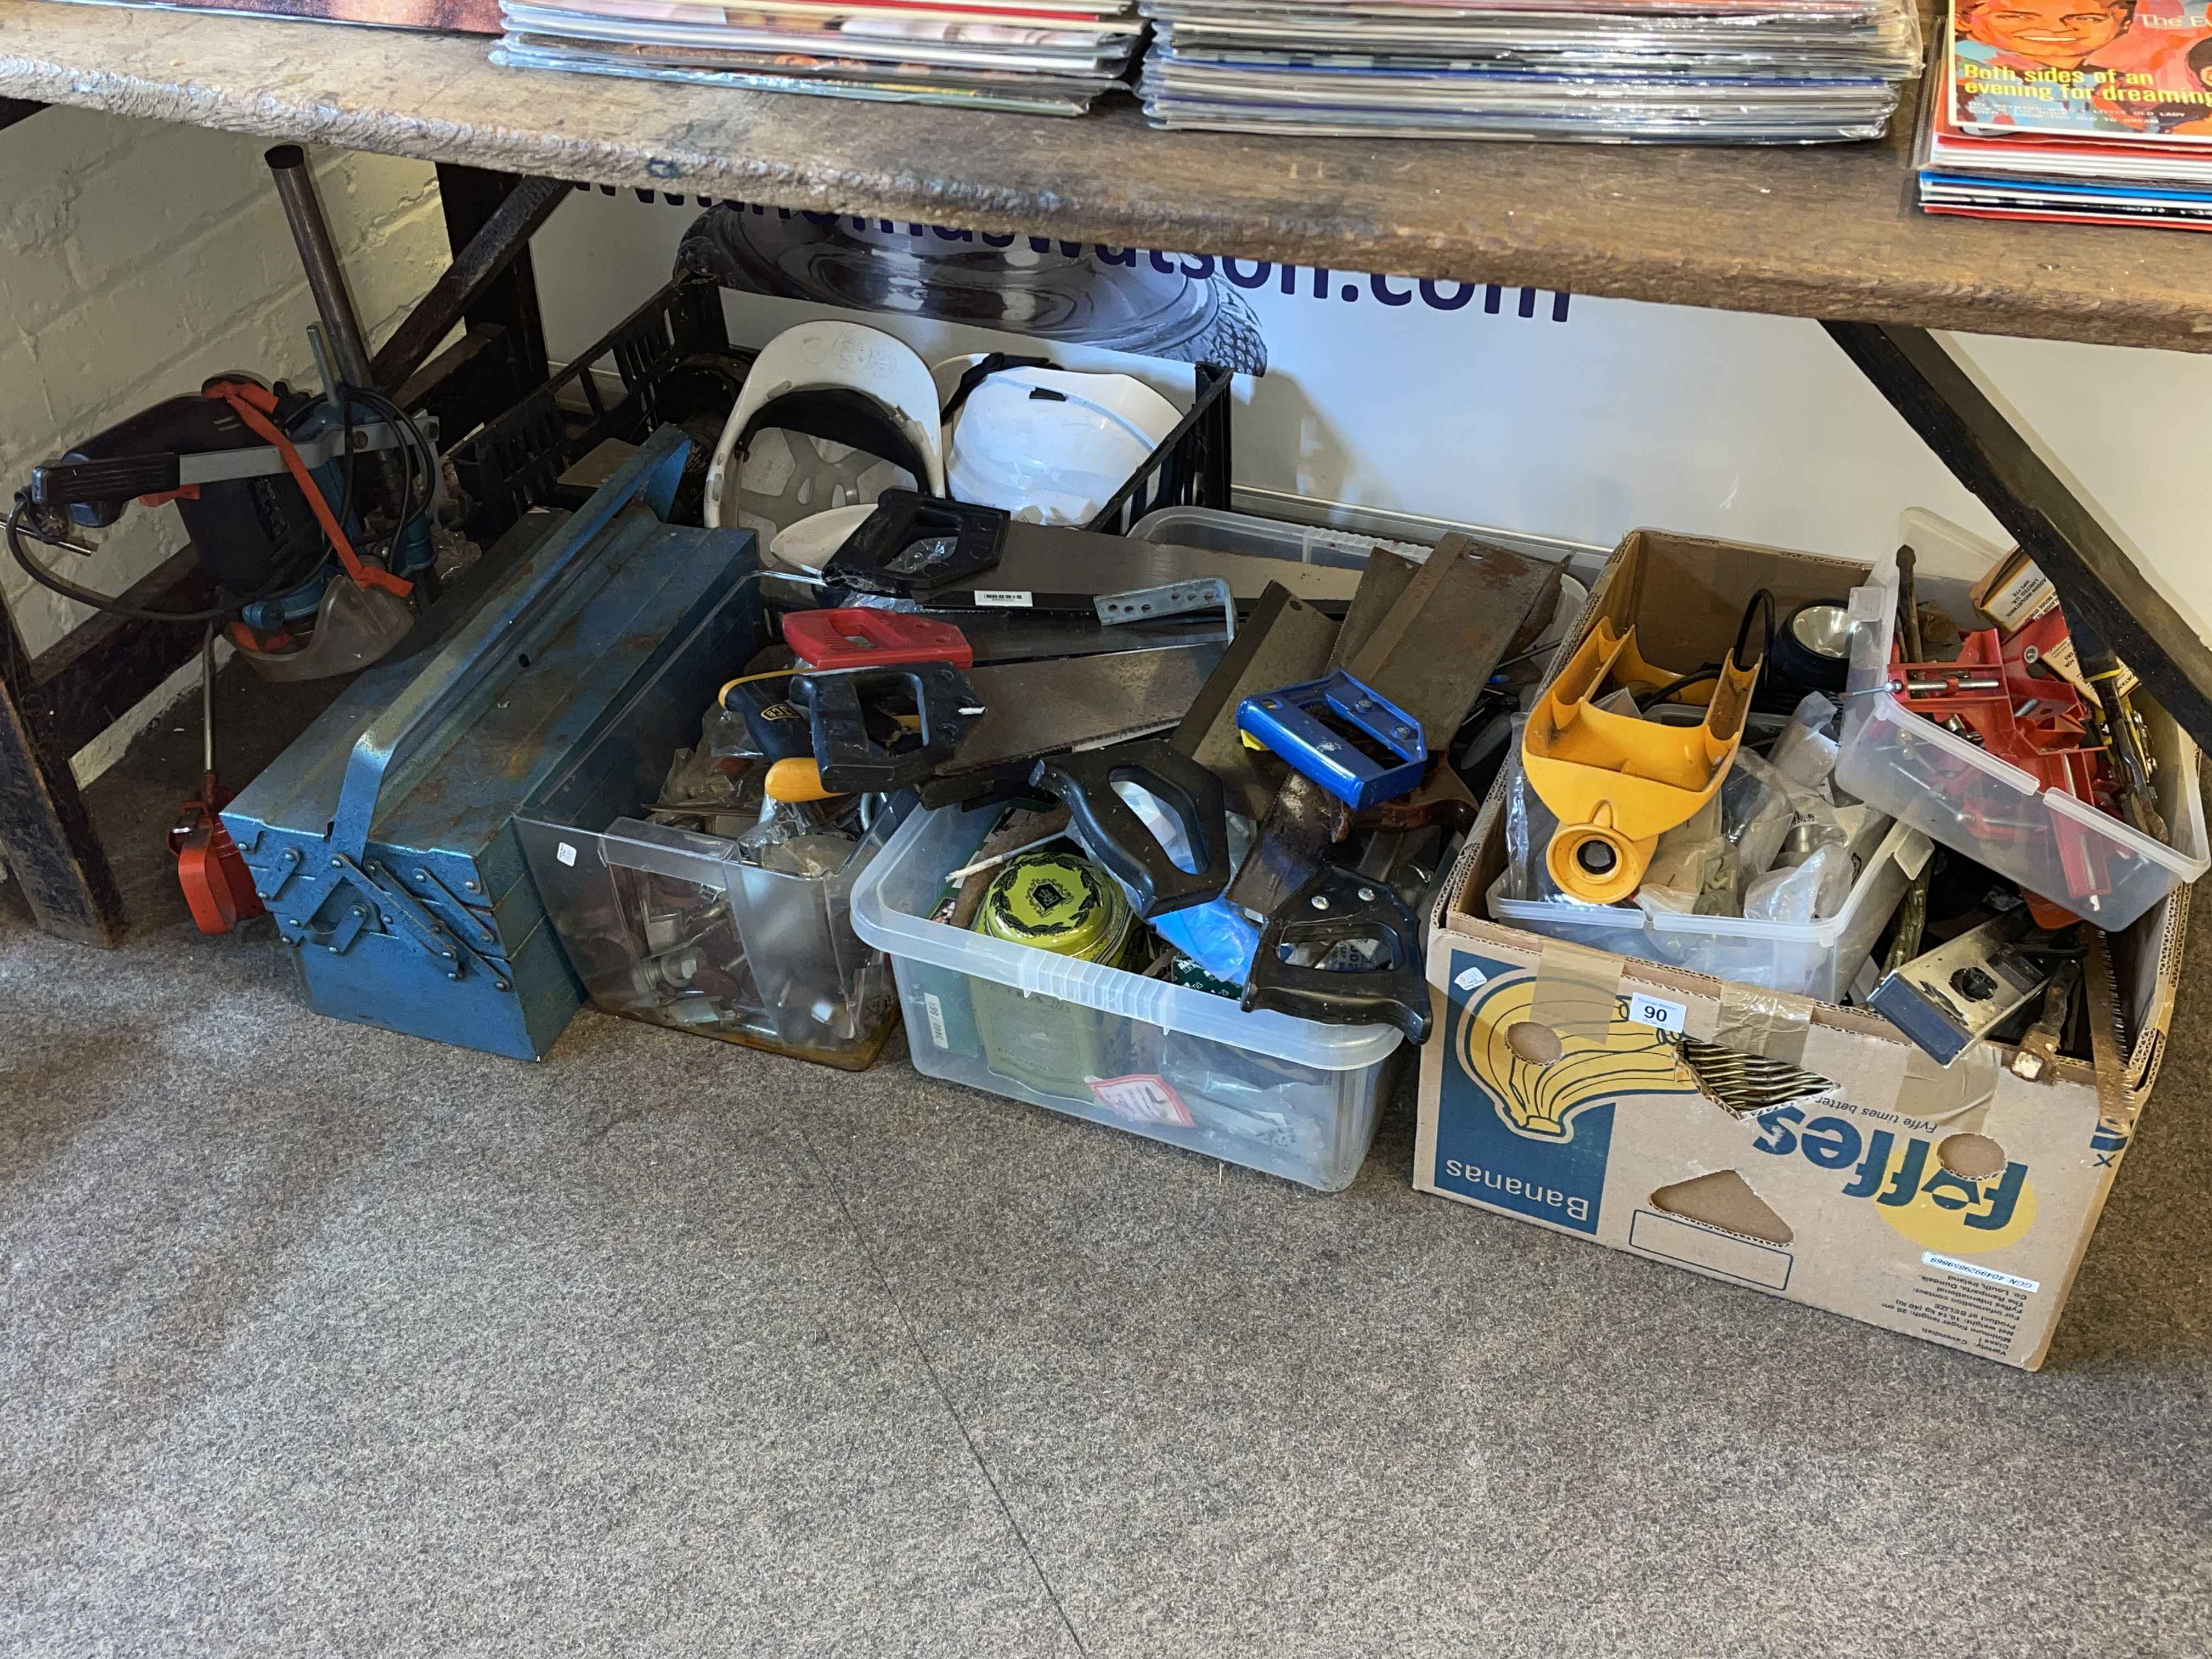 Collection of tools, helmets, oil cans, etc.